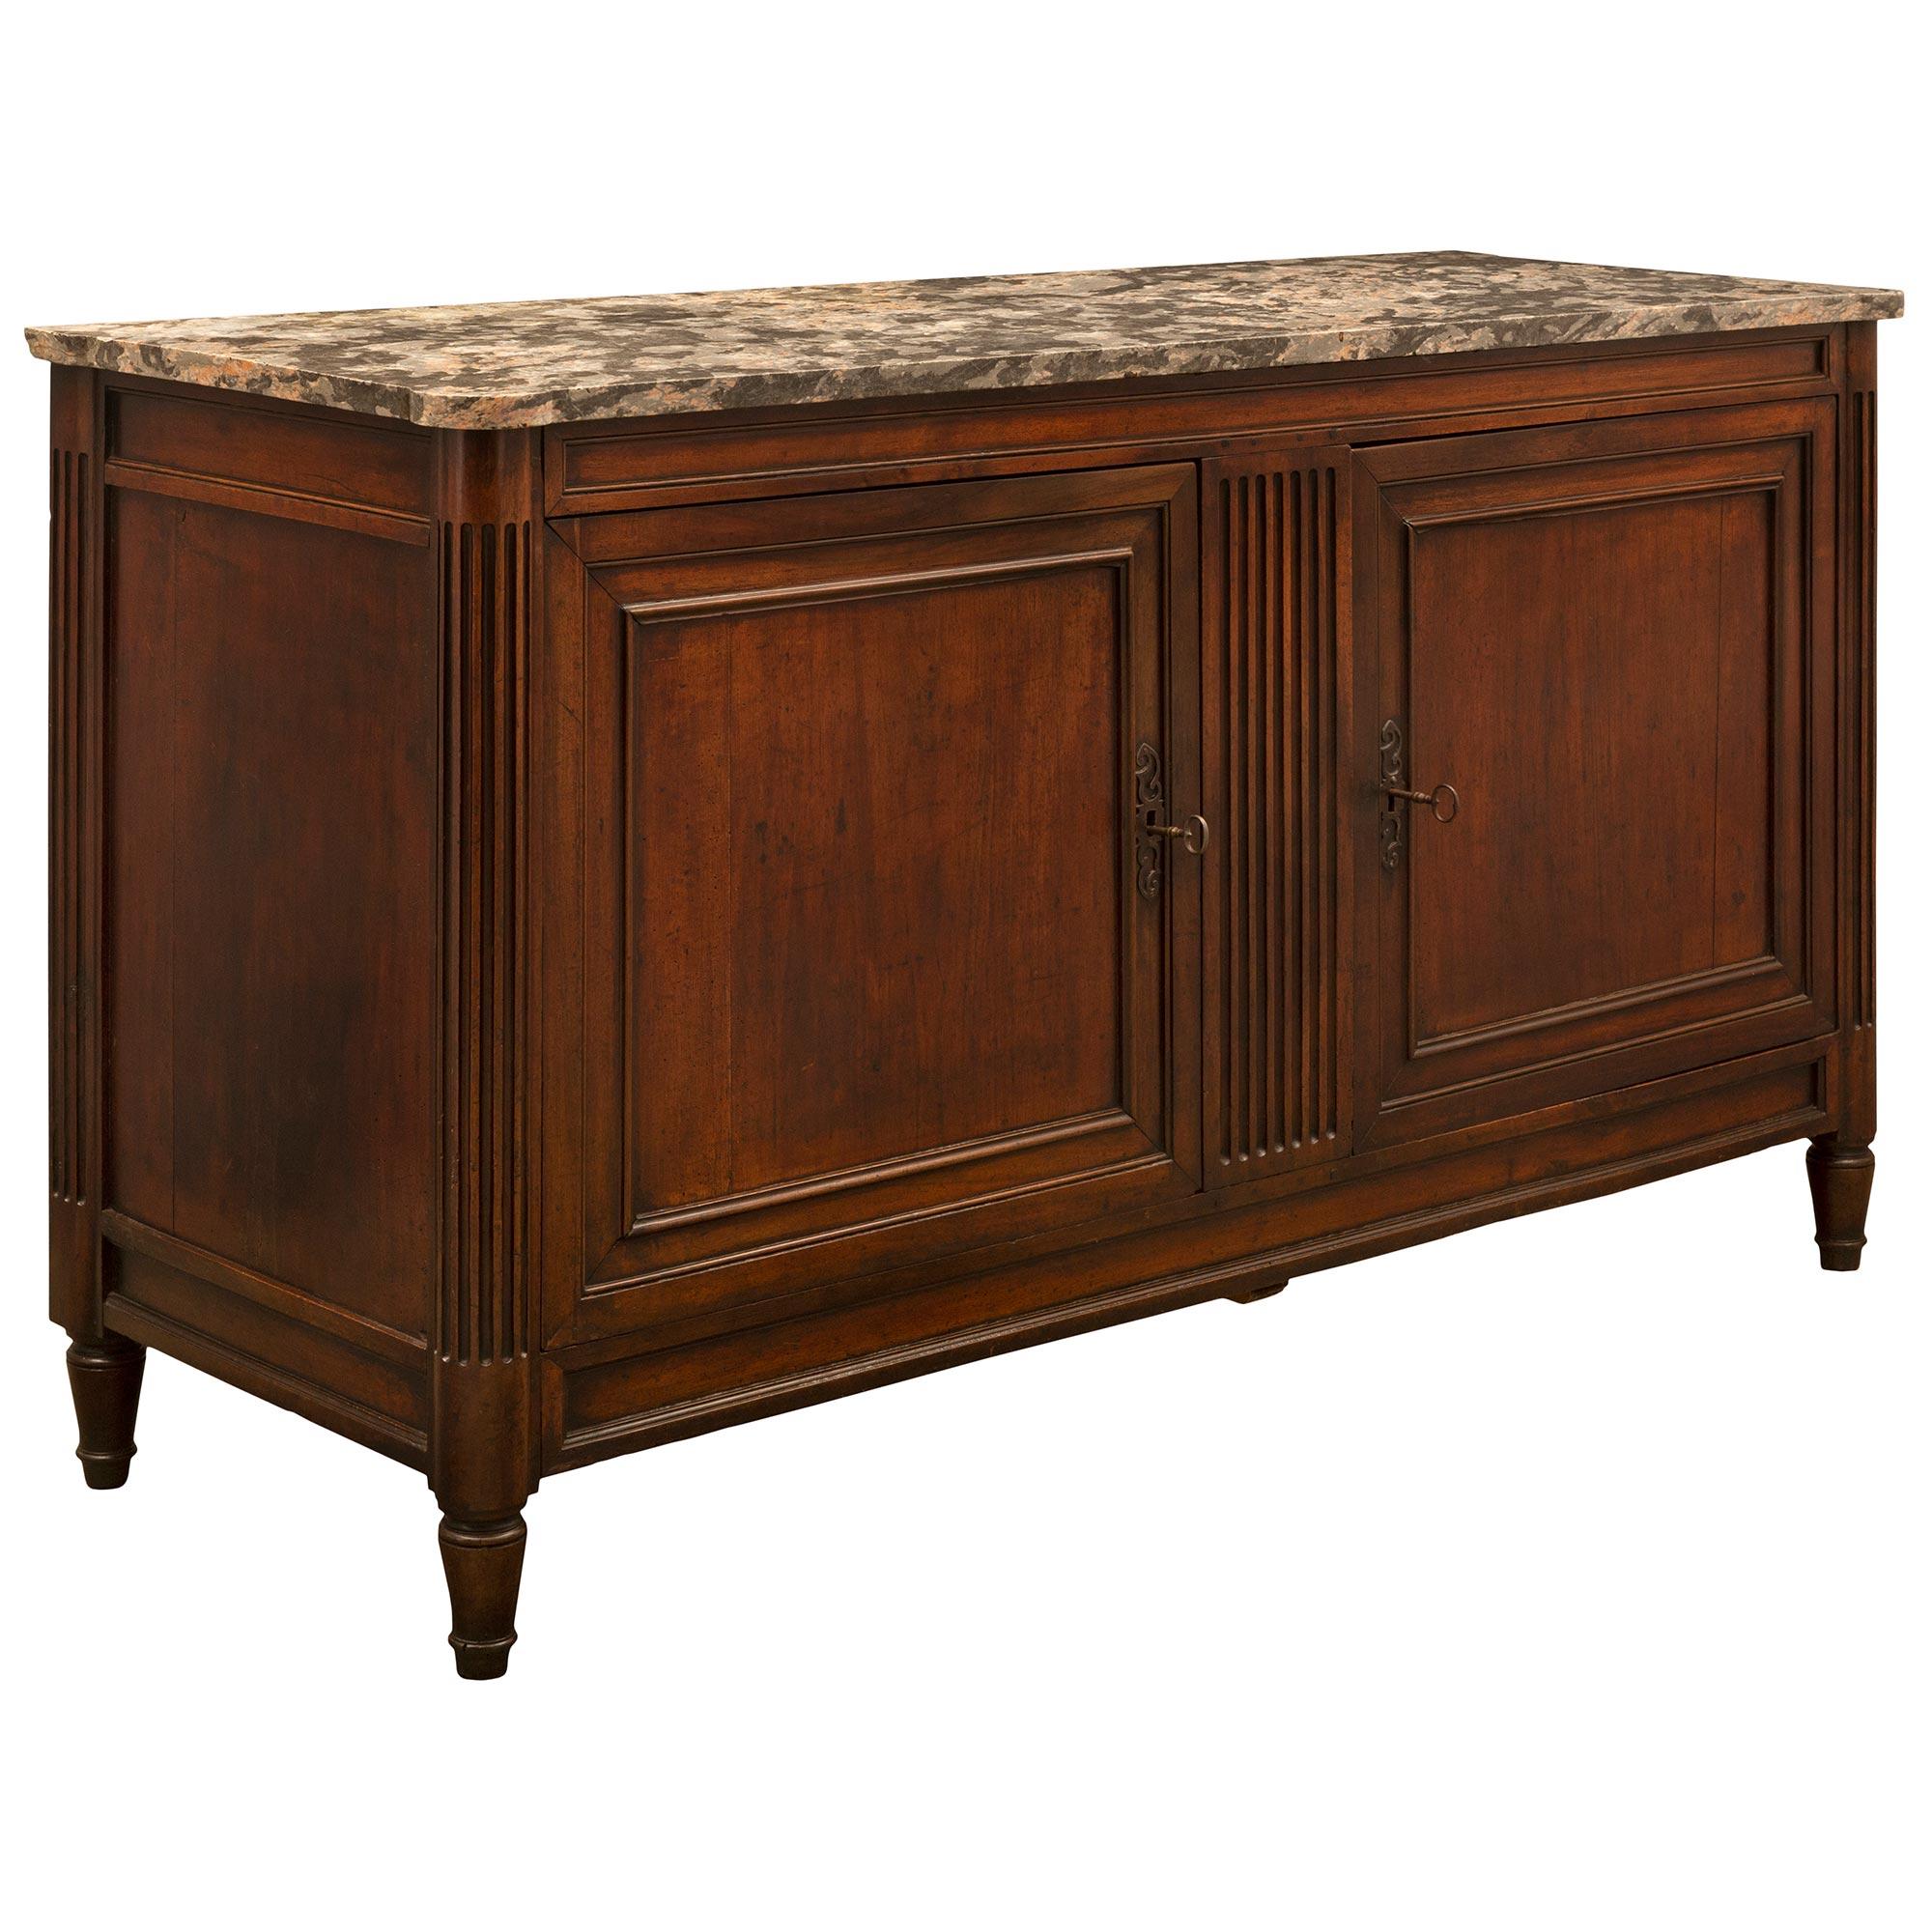 French 18th Century Louis XVI Period Walnut Buffet In Good Condition For Sale In West Palm Beach, FL